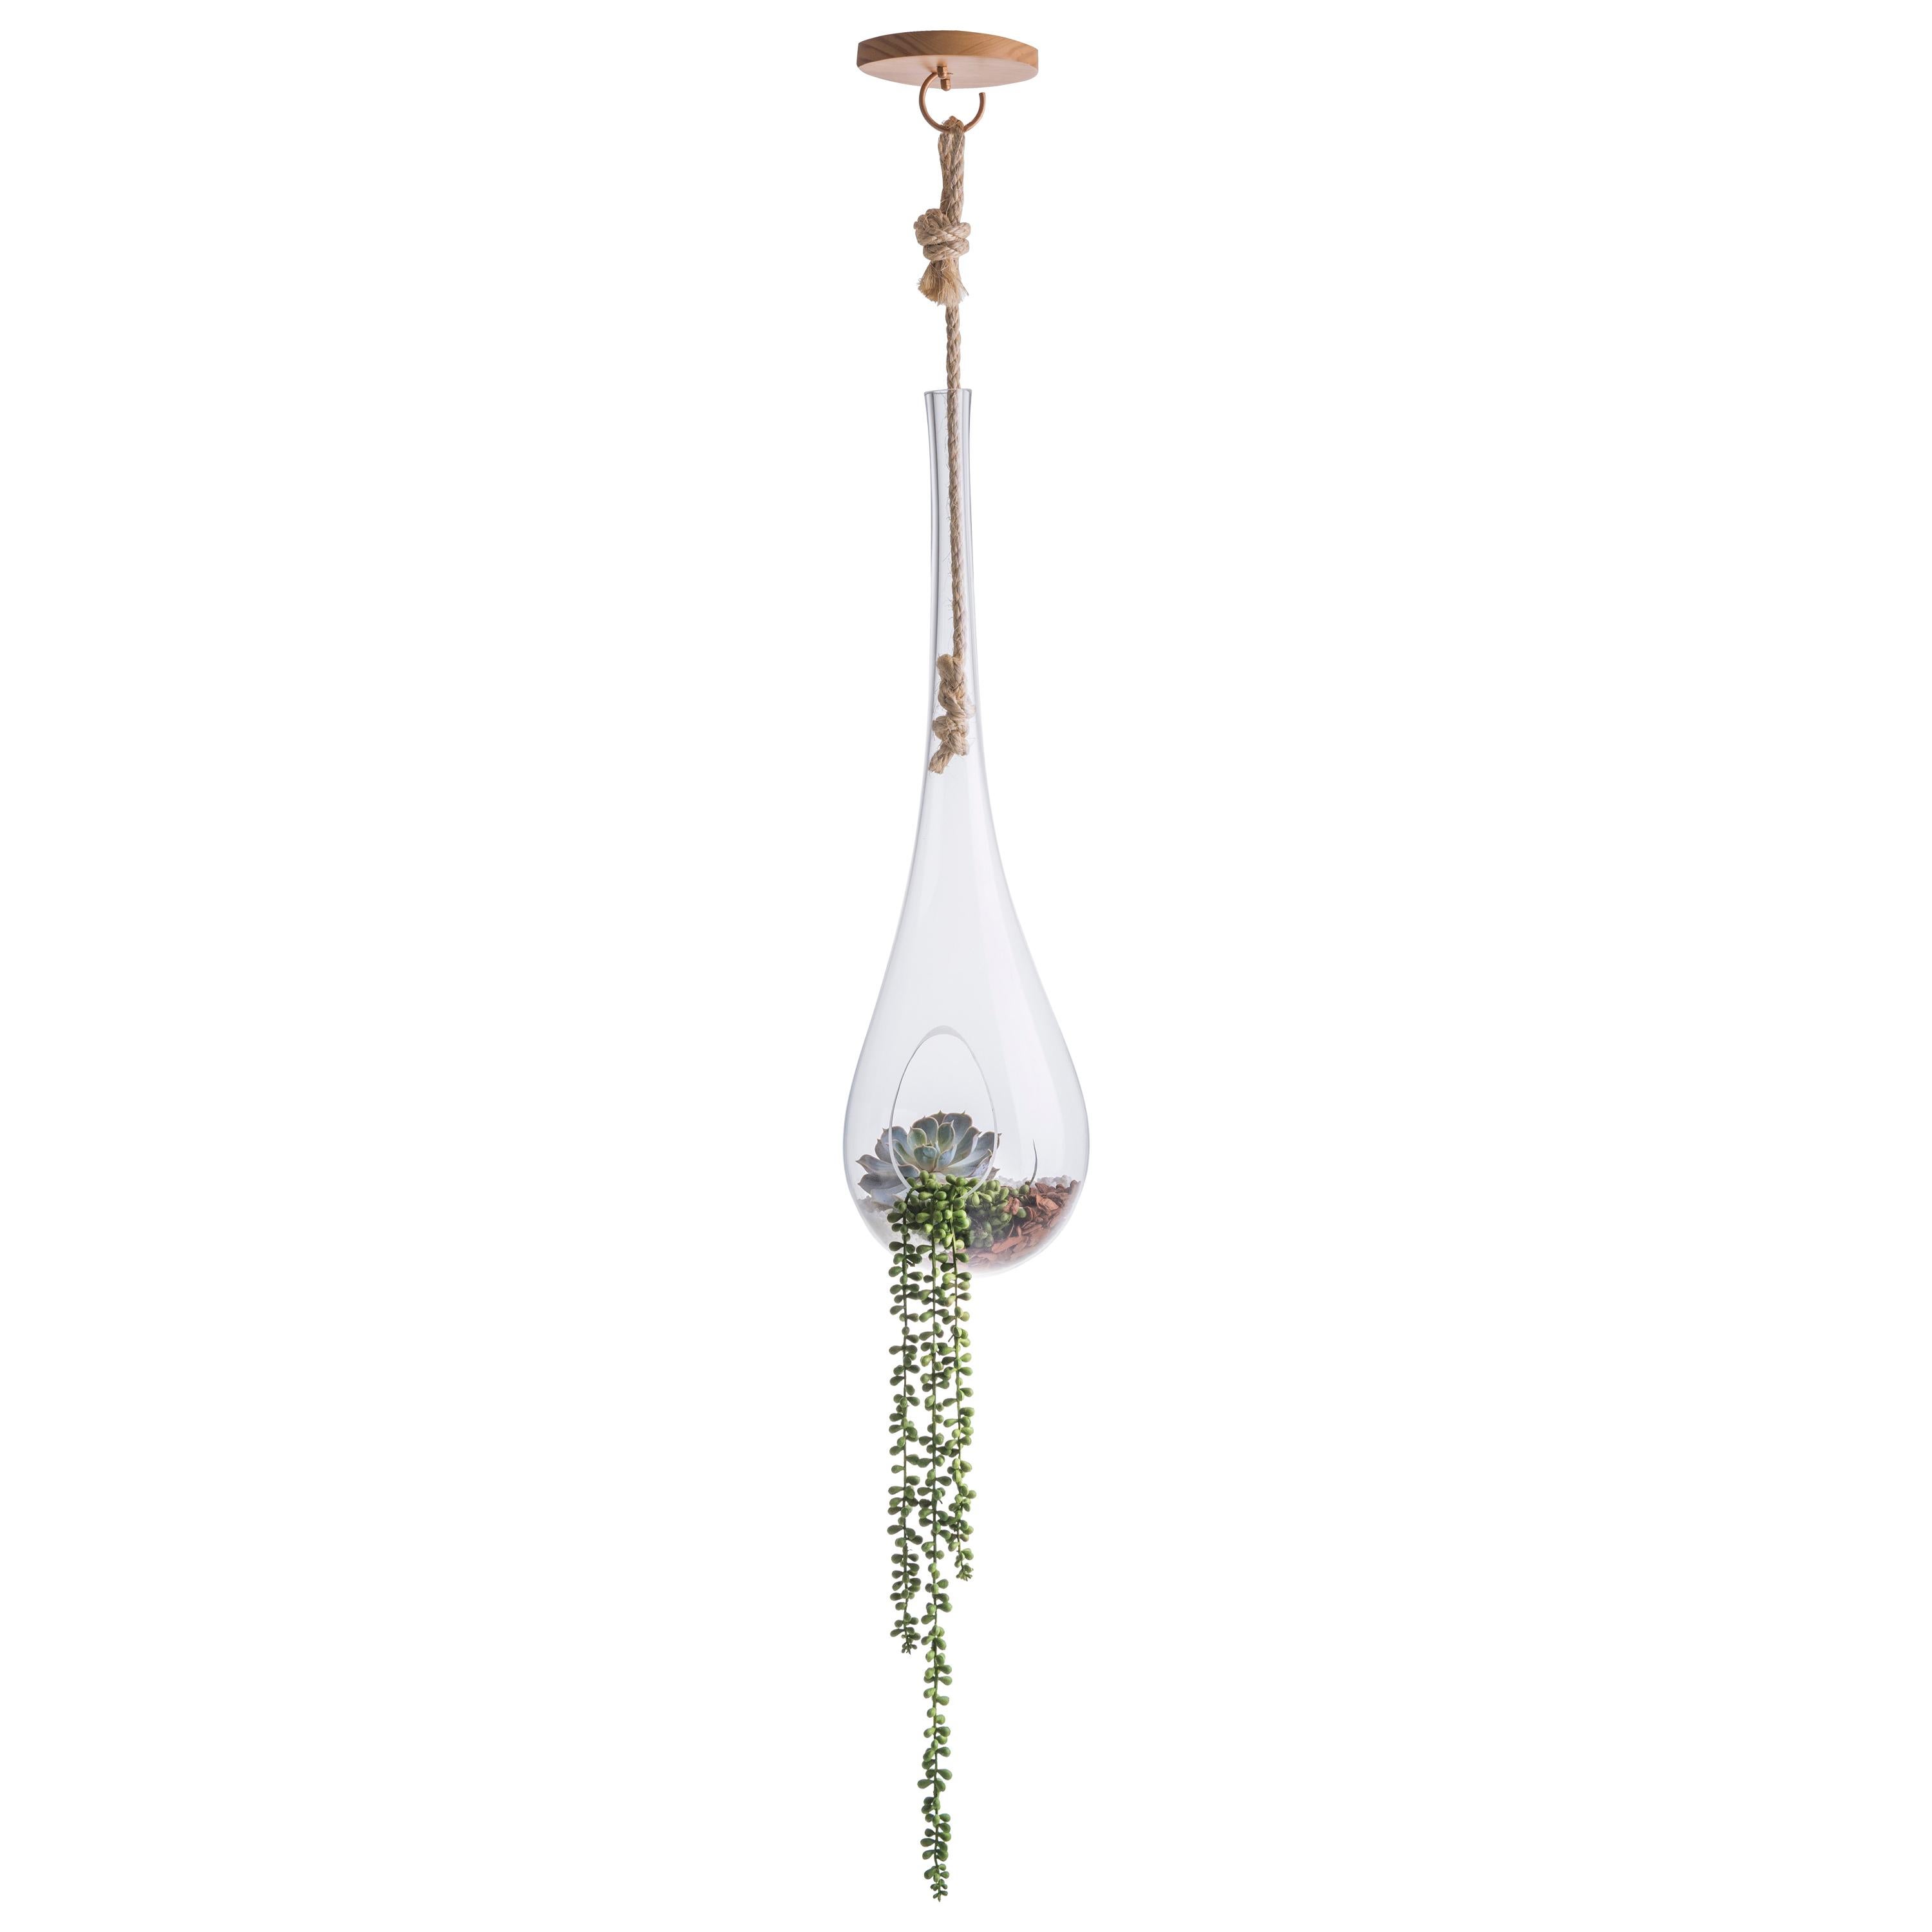 Suspended Terrarium Nest Small Cupola, Brazilian Wood, Glass and Sisal For Sale